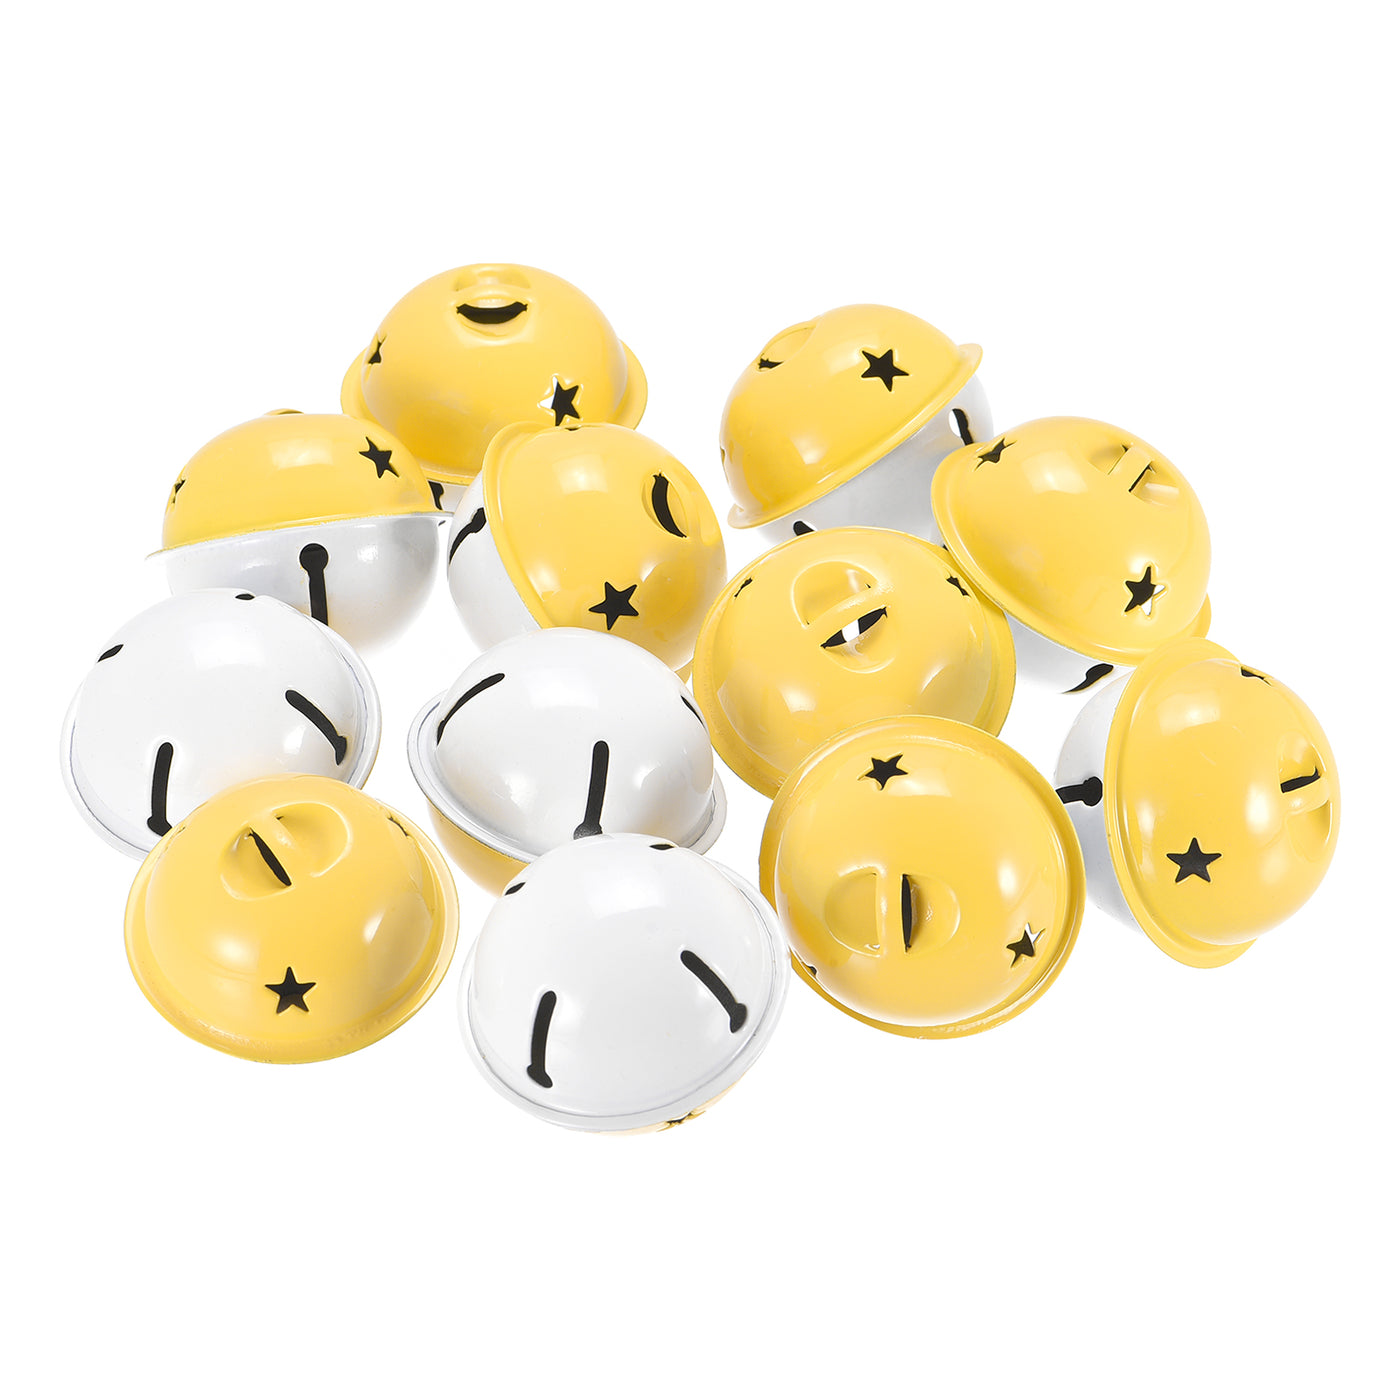 Uxcell Uxcell Jingle Bells, 40mm 64pcs Craft Bells with Star Cutouts for DIY, White/Orange